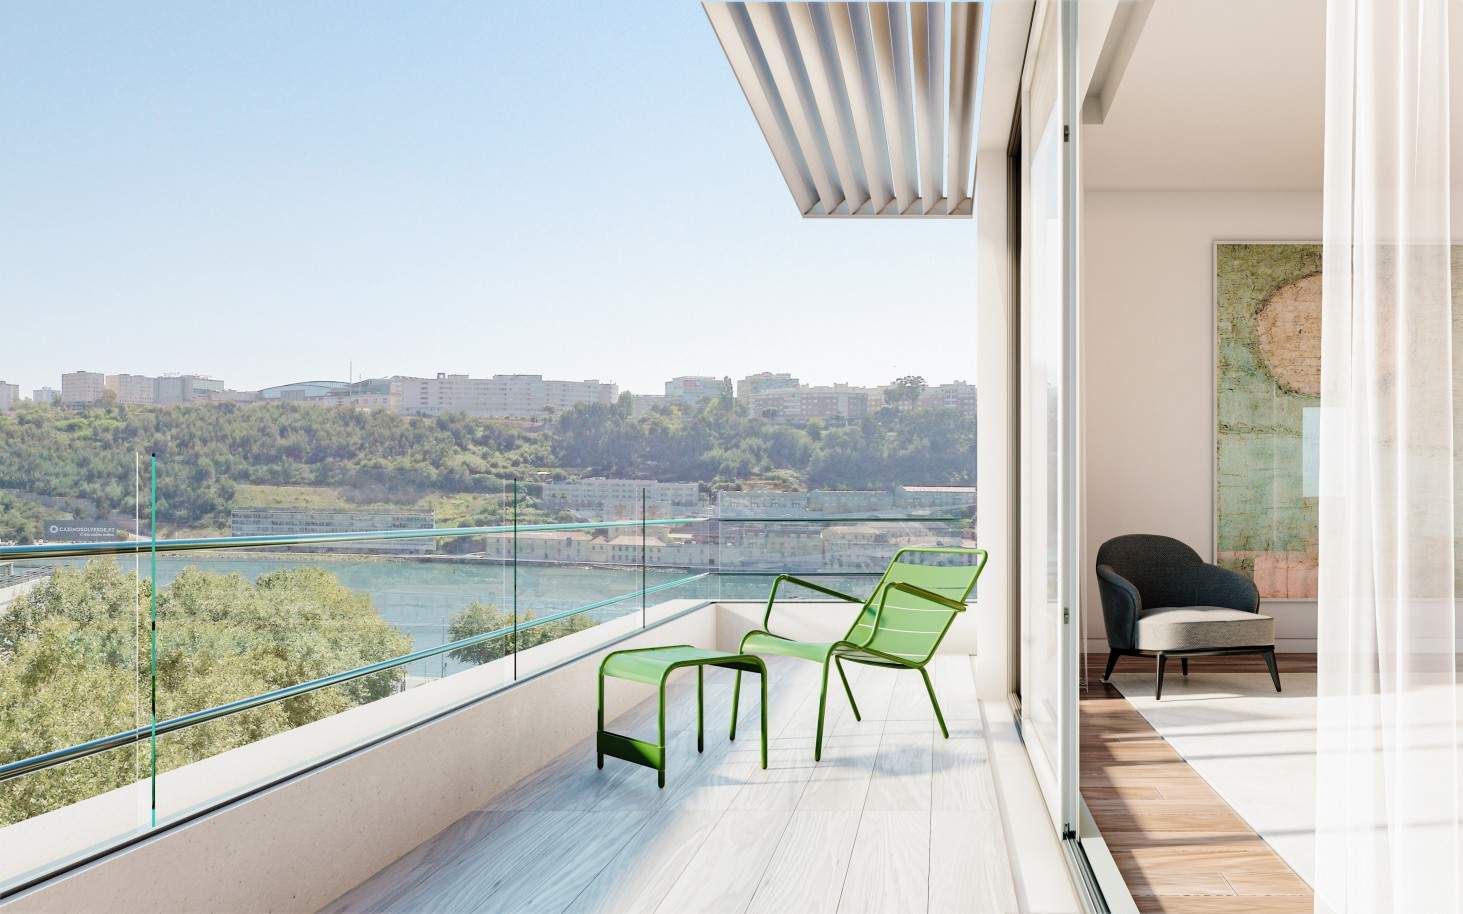 5th Porto | New 2 bedroom Penthouse with pool and river views, Porto, Portugal_198426